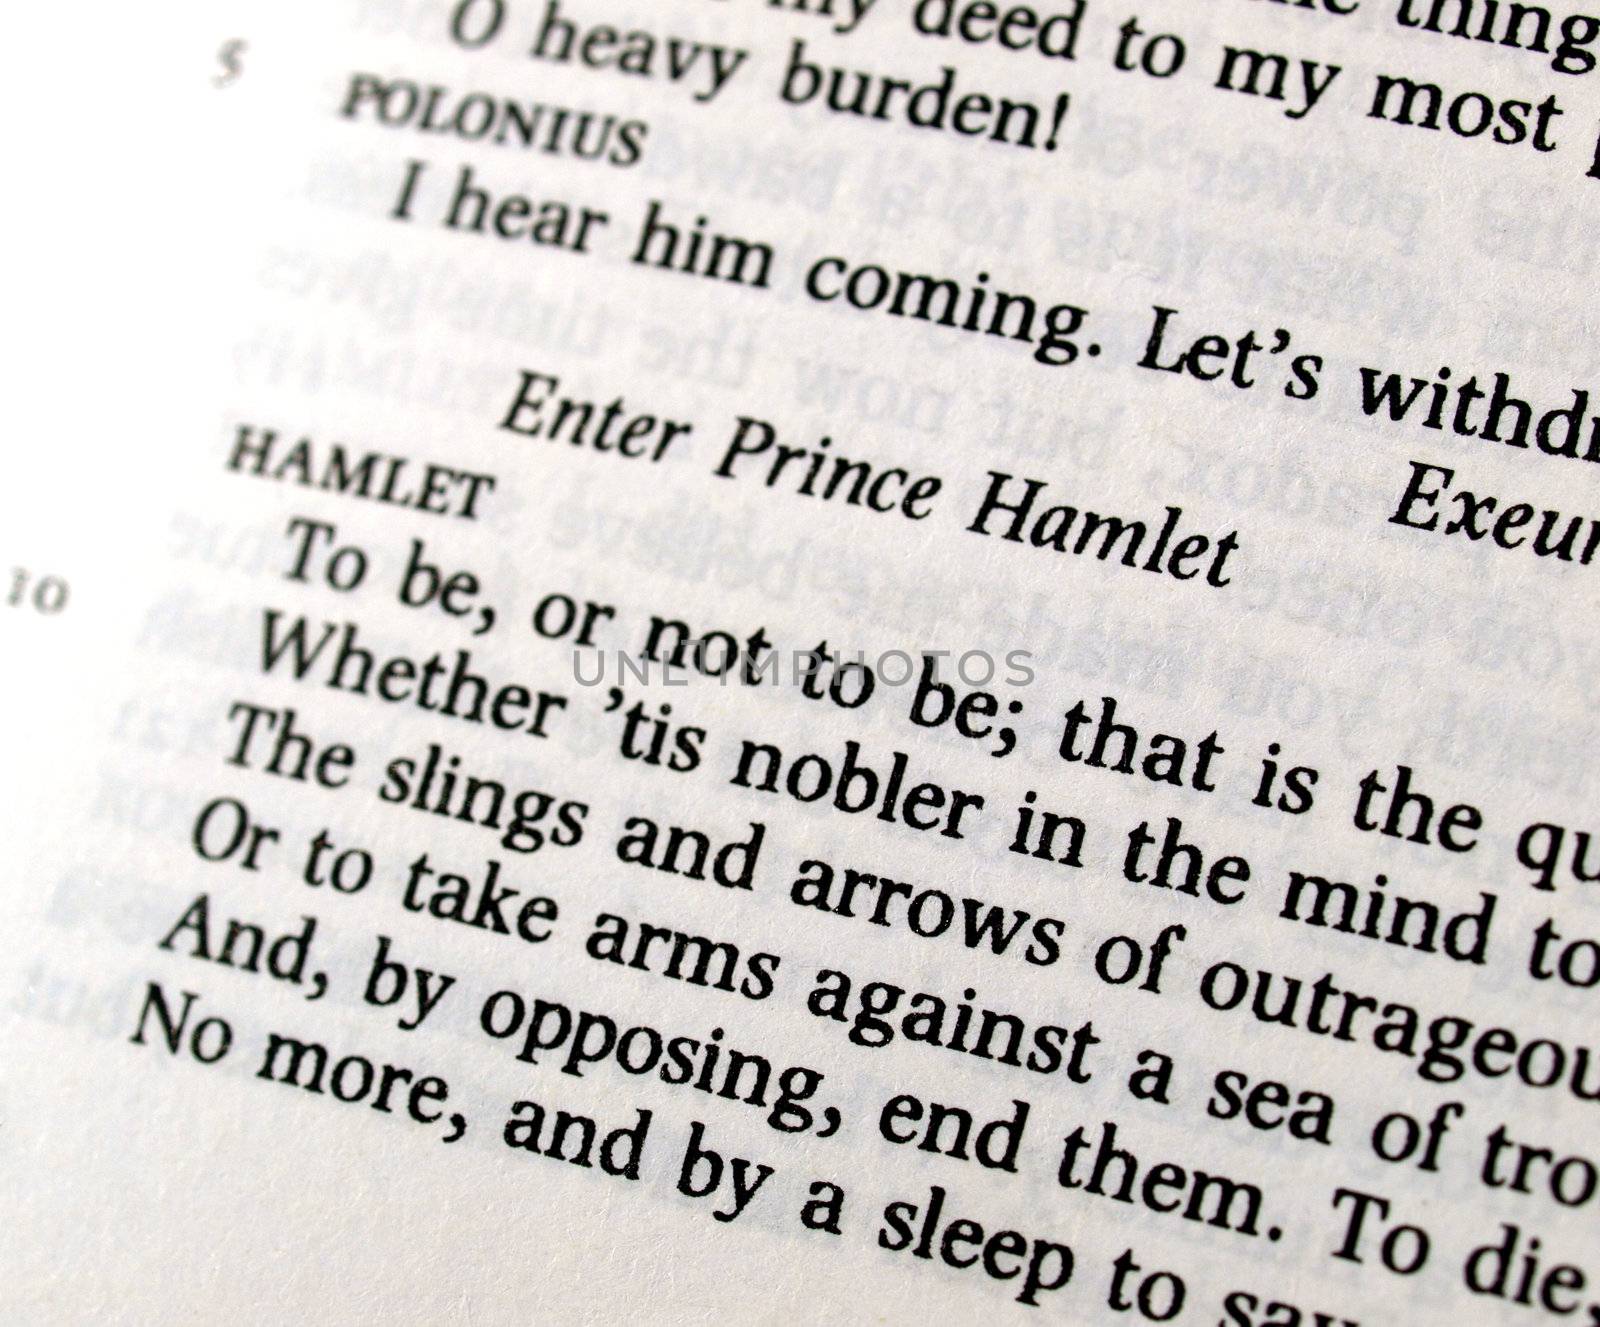 Shakespeare's Hamlet To be or not to be